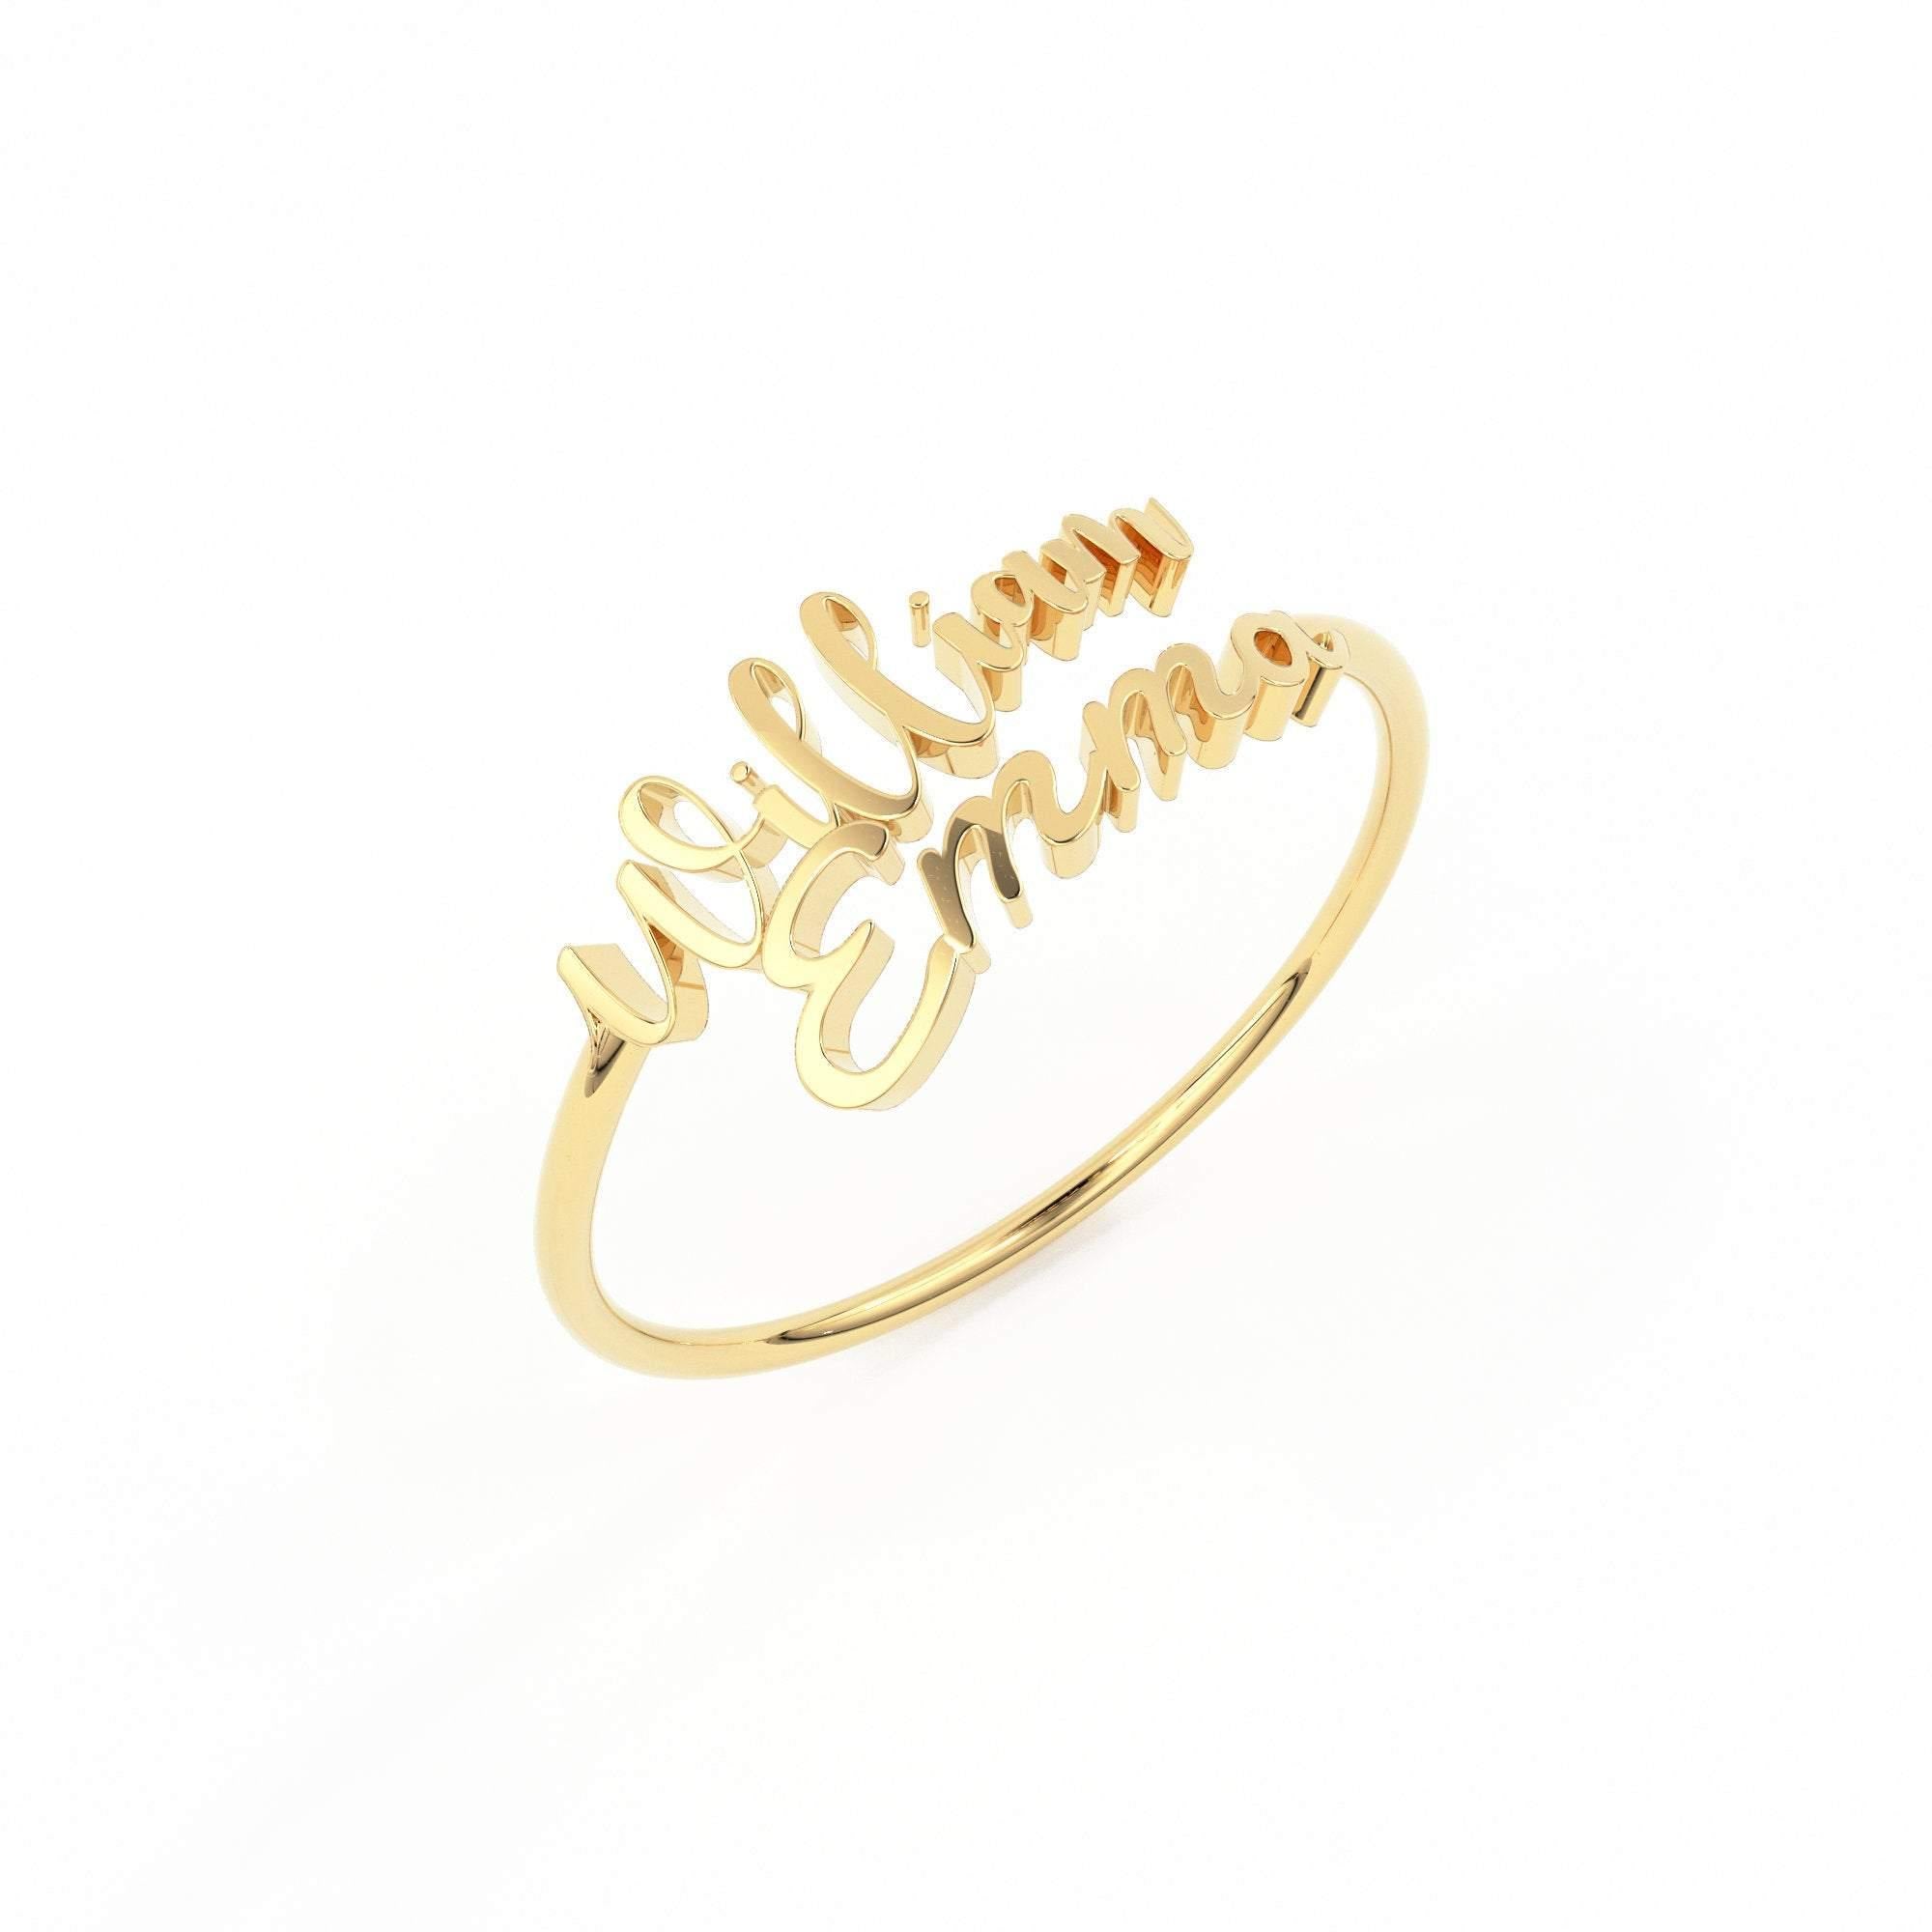 Personalize Two Names Ring – Blinglane